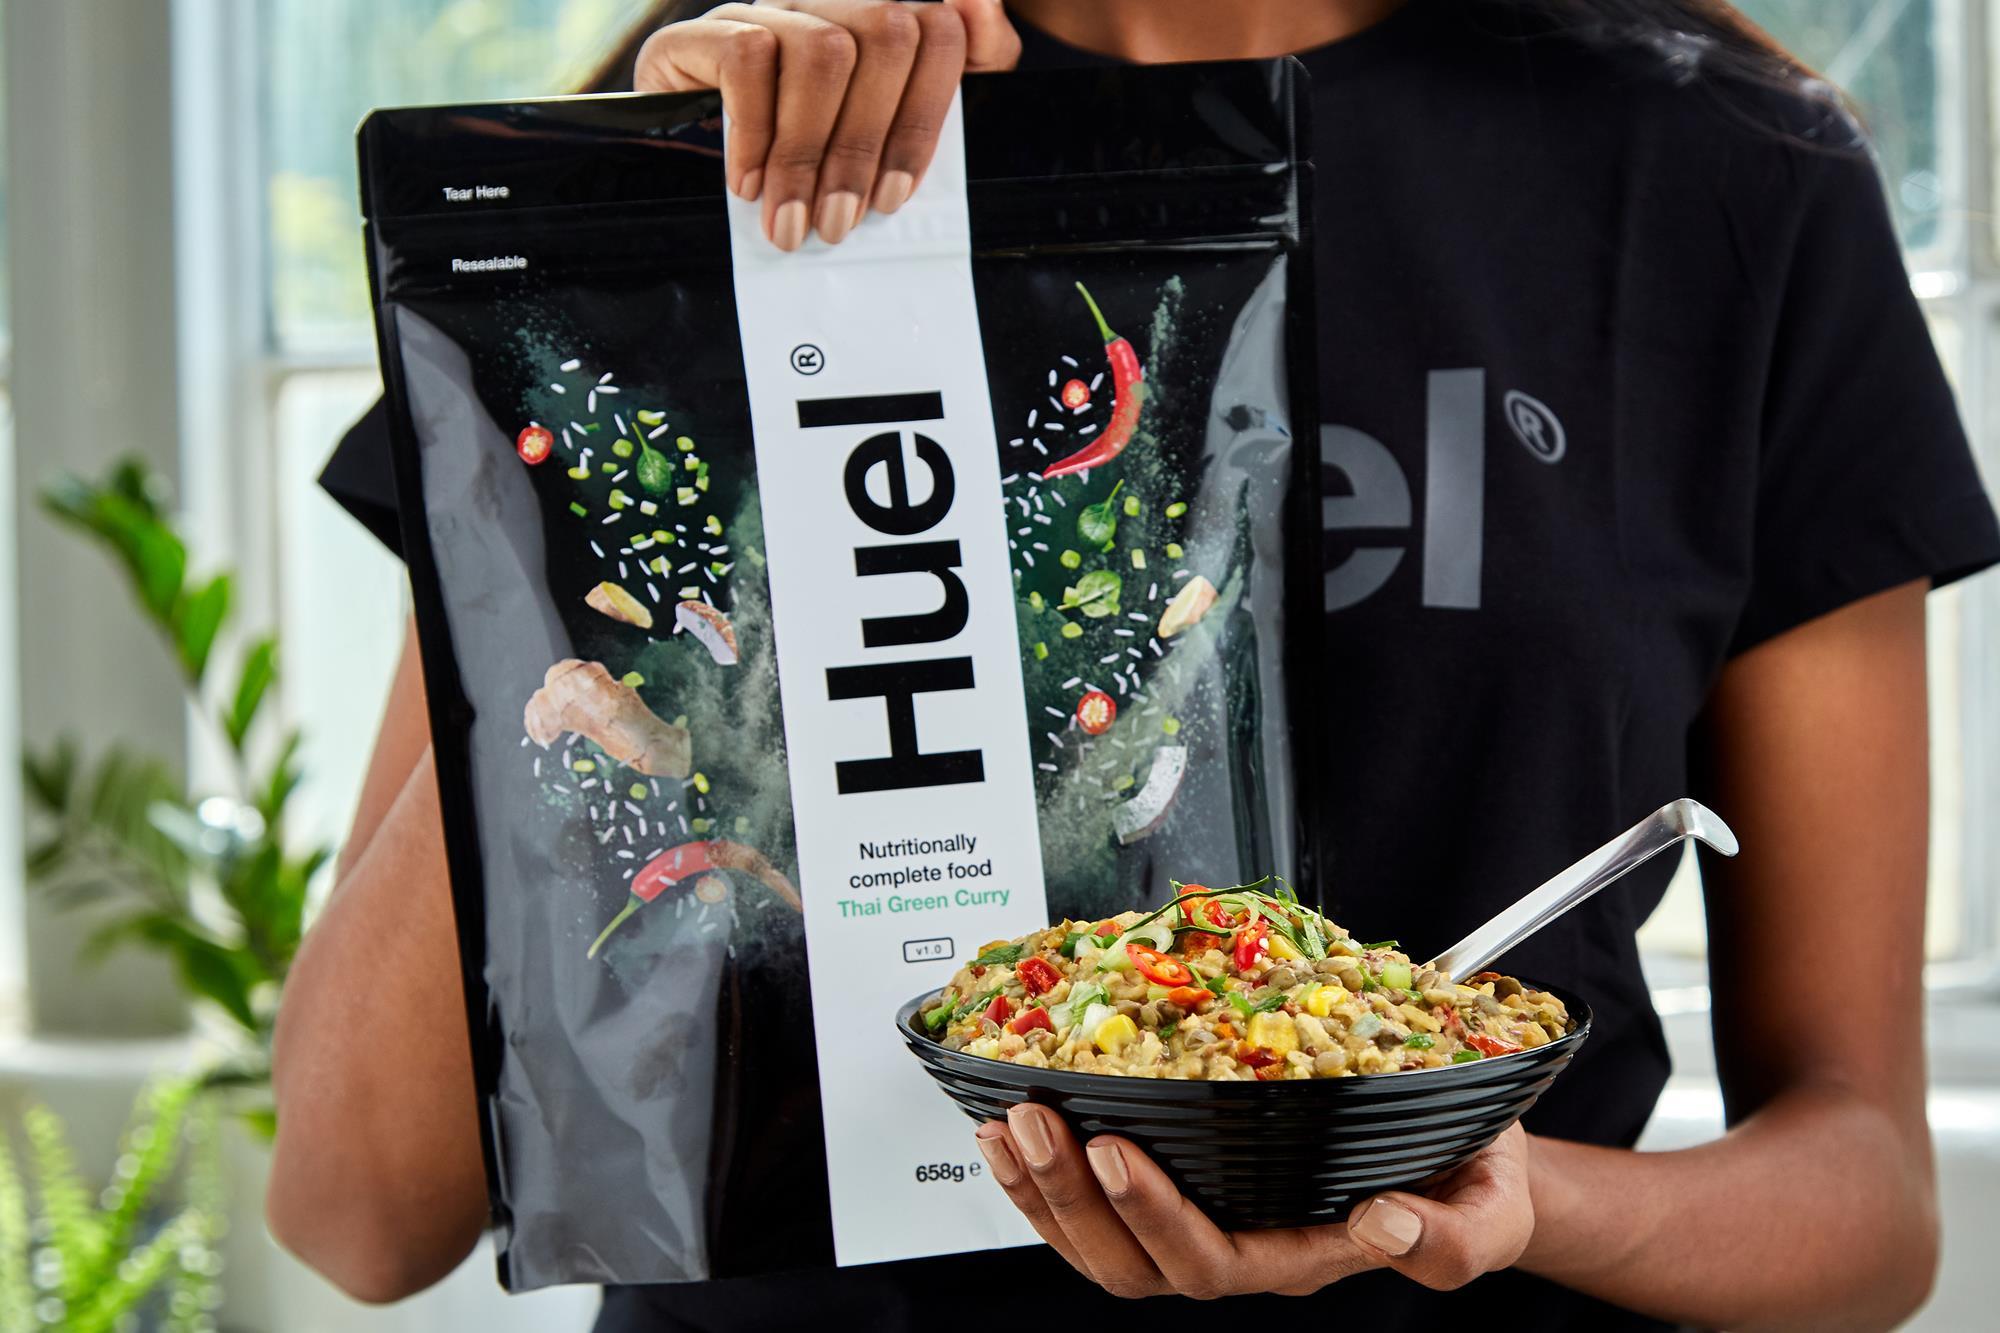 Huel moves into ready meals with 'Hot & Savoury' instant duo, News